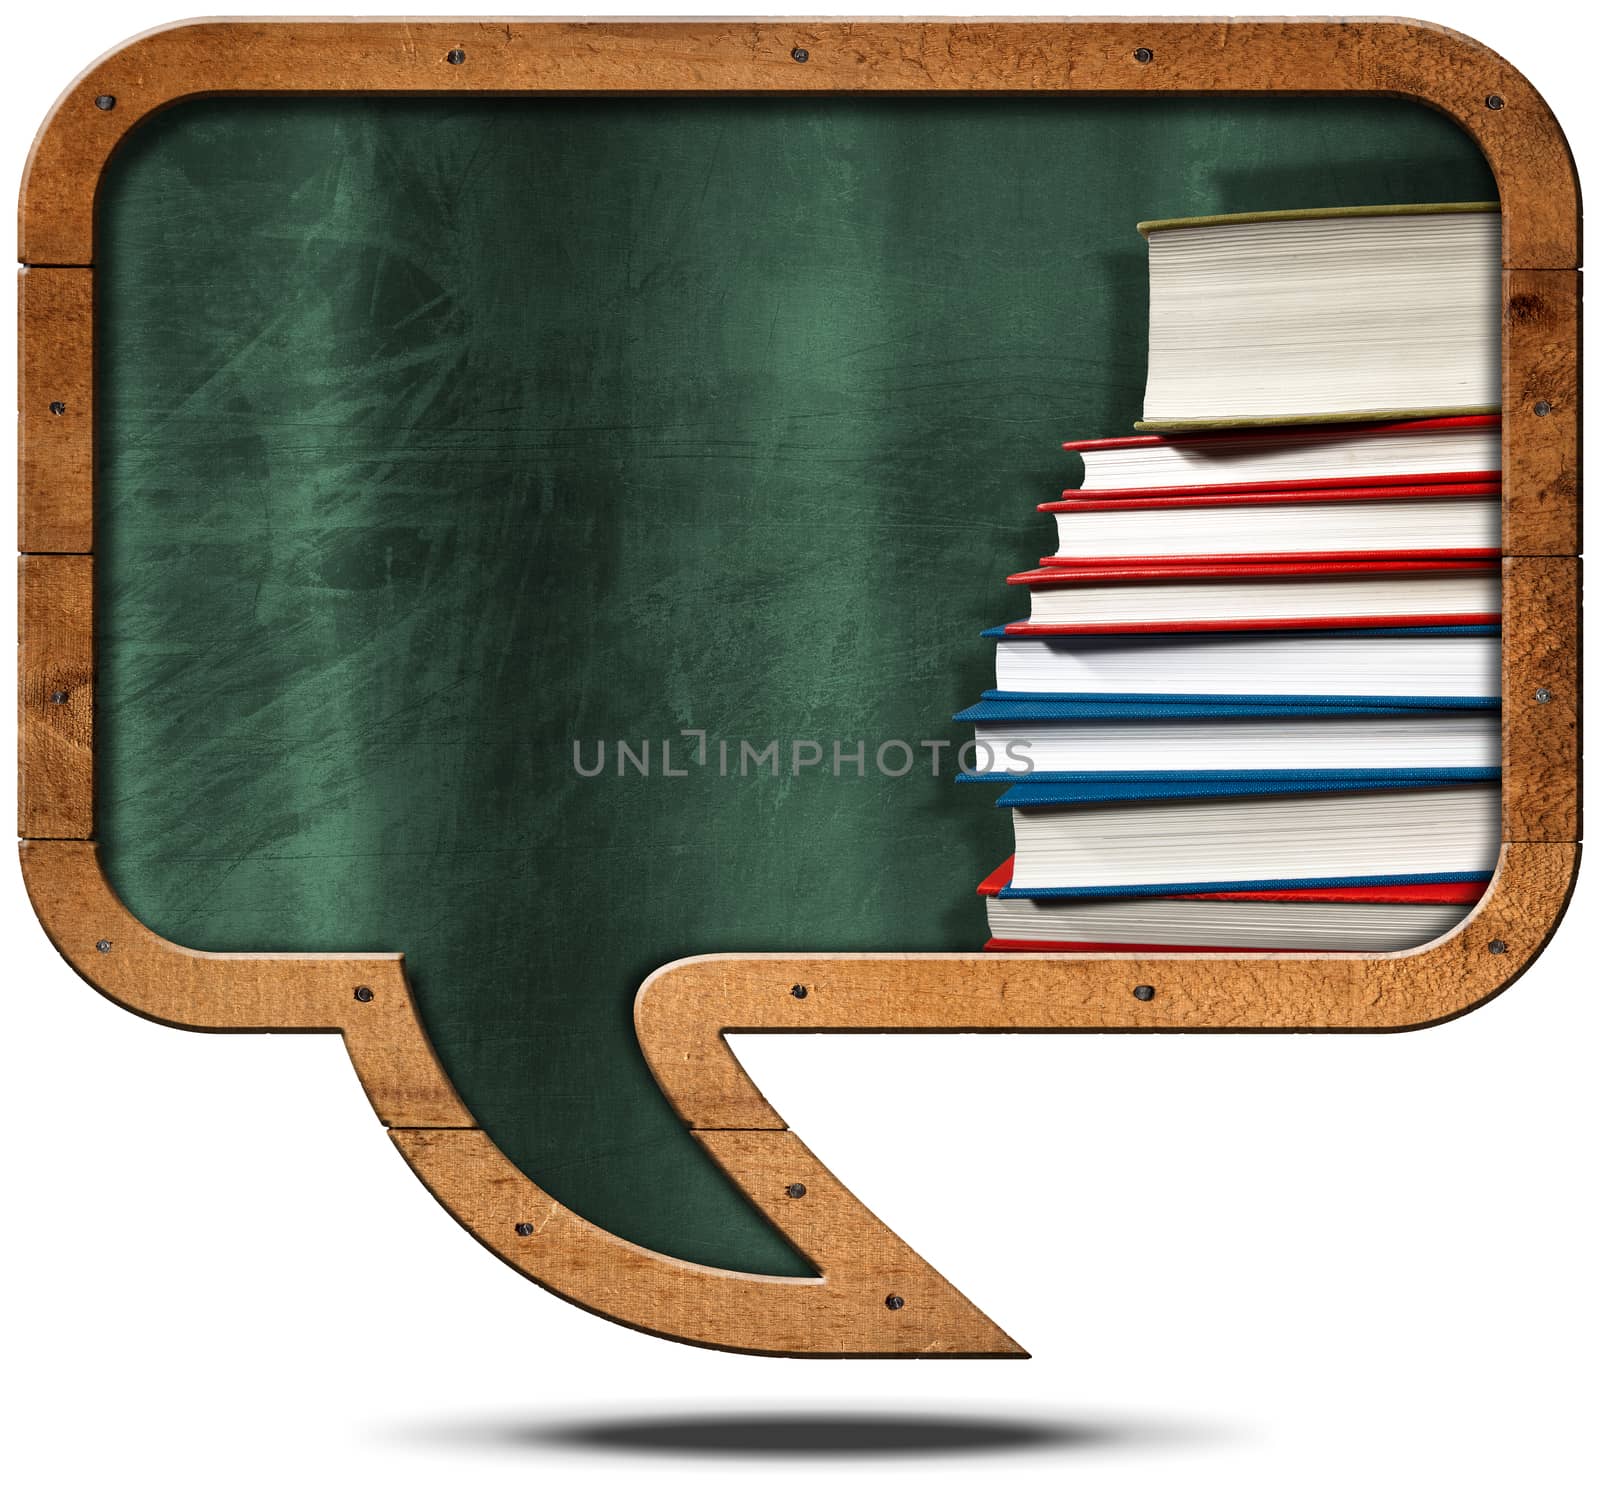 Blackboard and Books - Speech Bubble Shaped by catalby